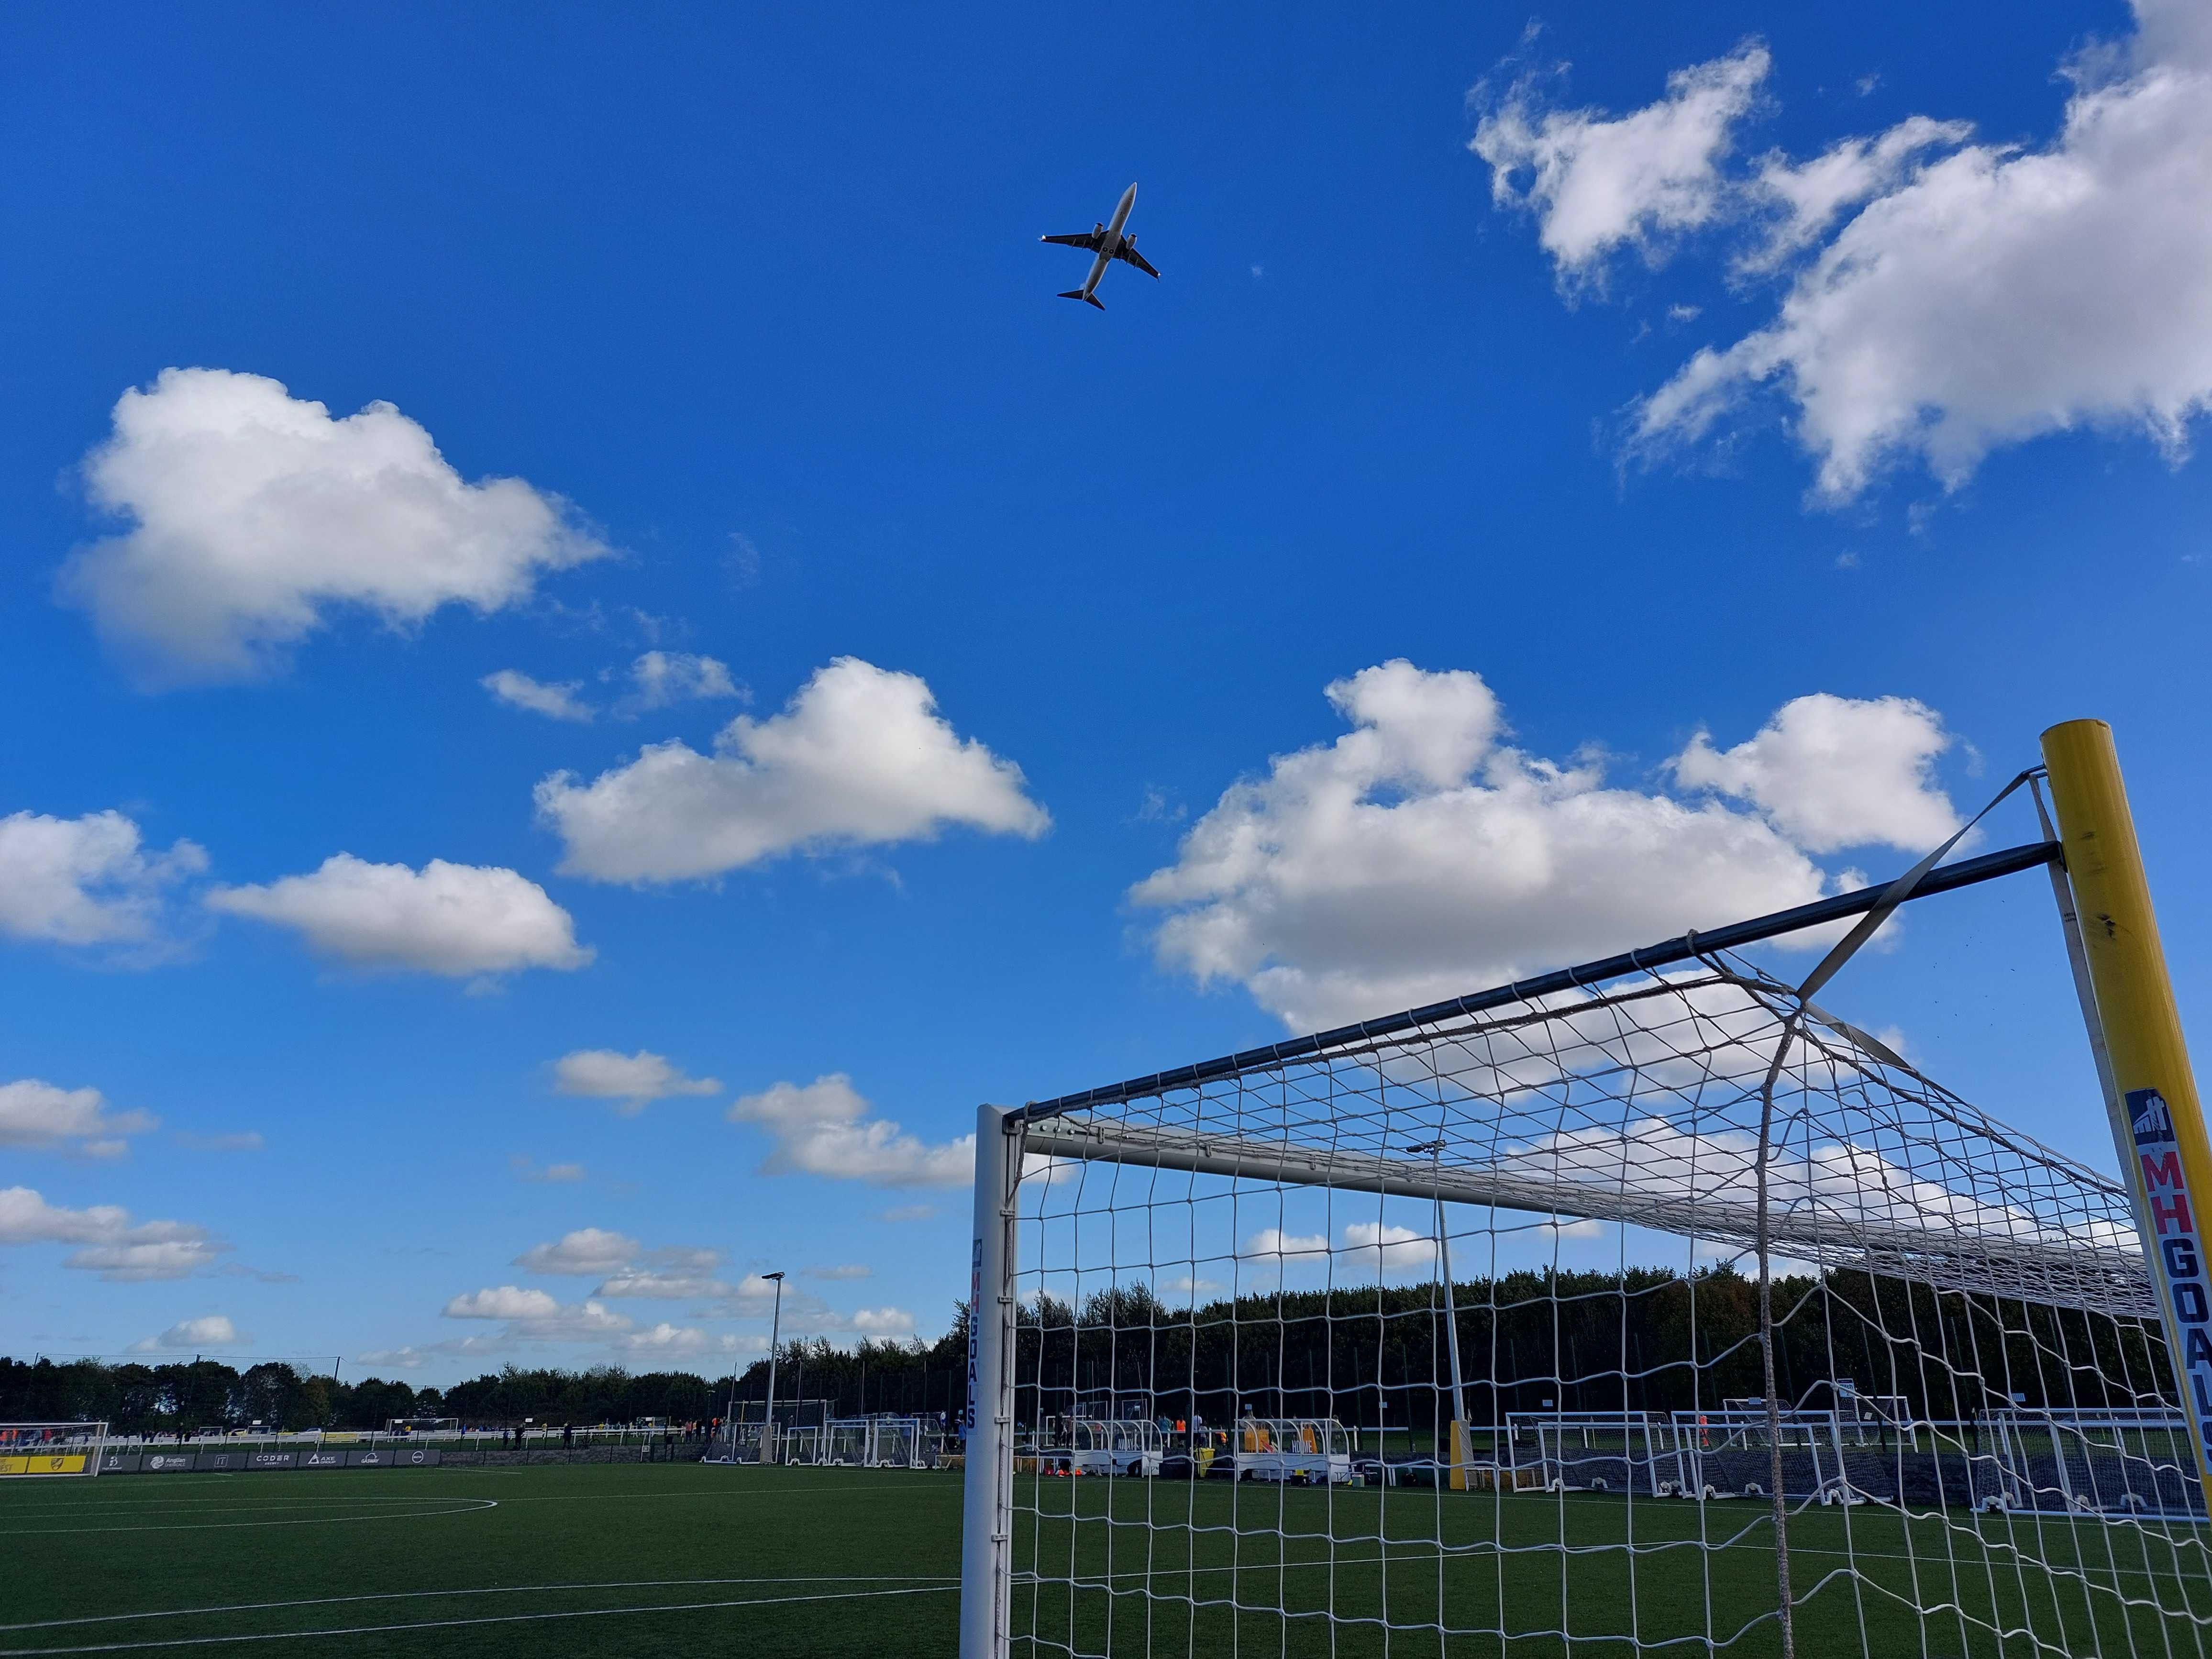 A plane flying over a football goal